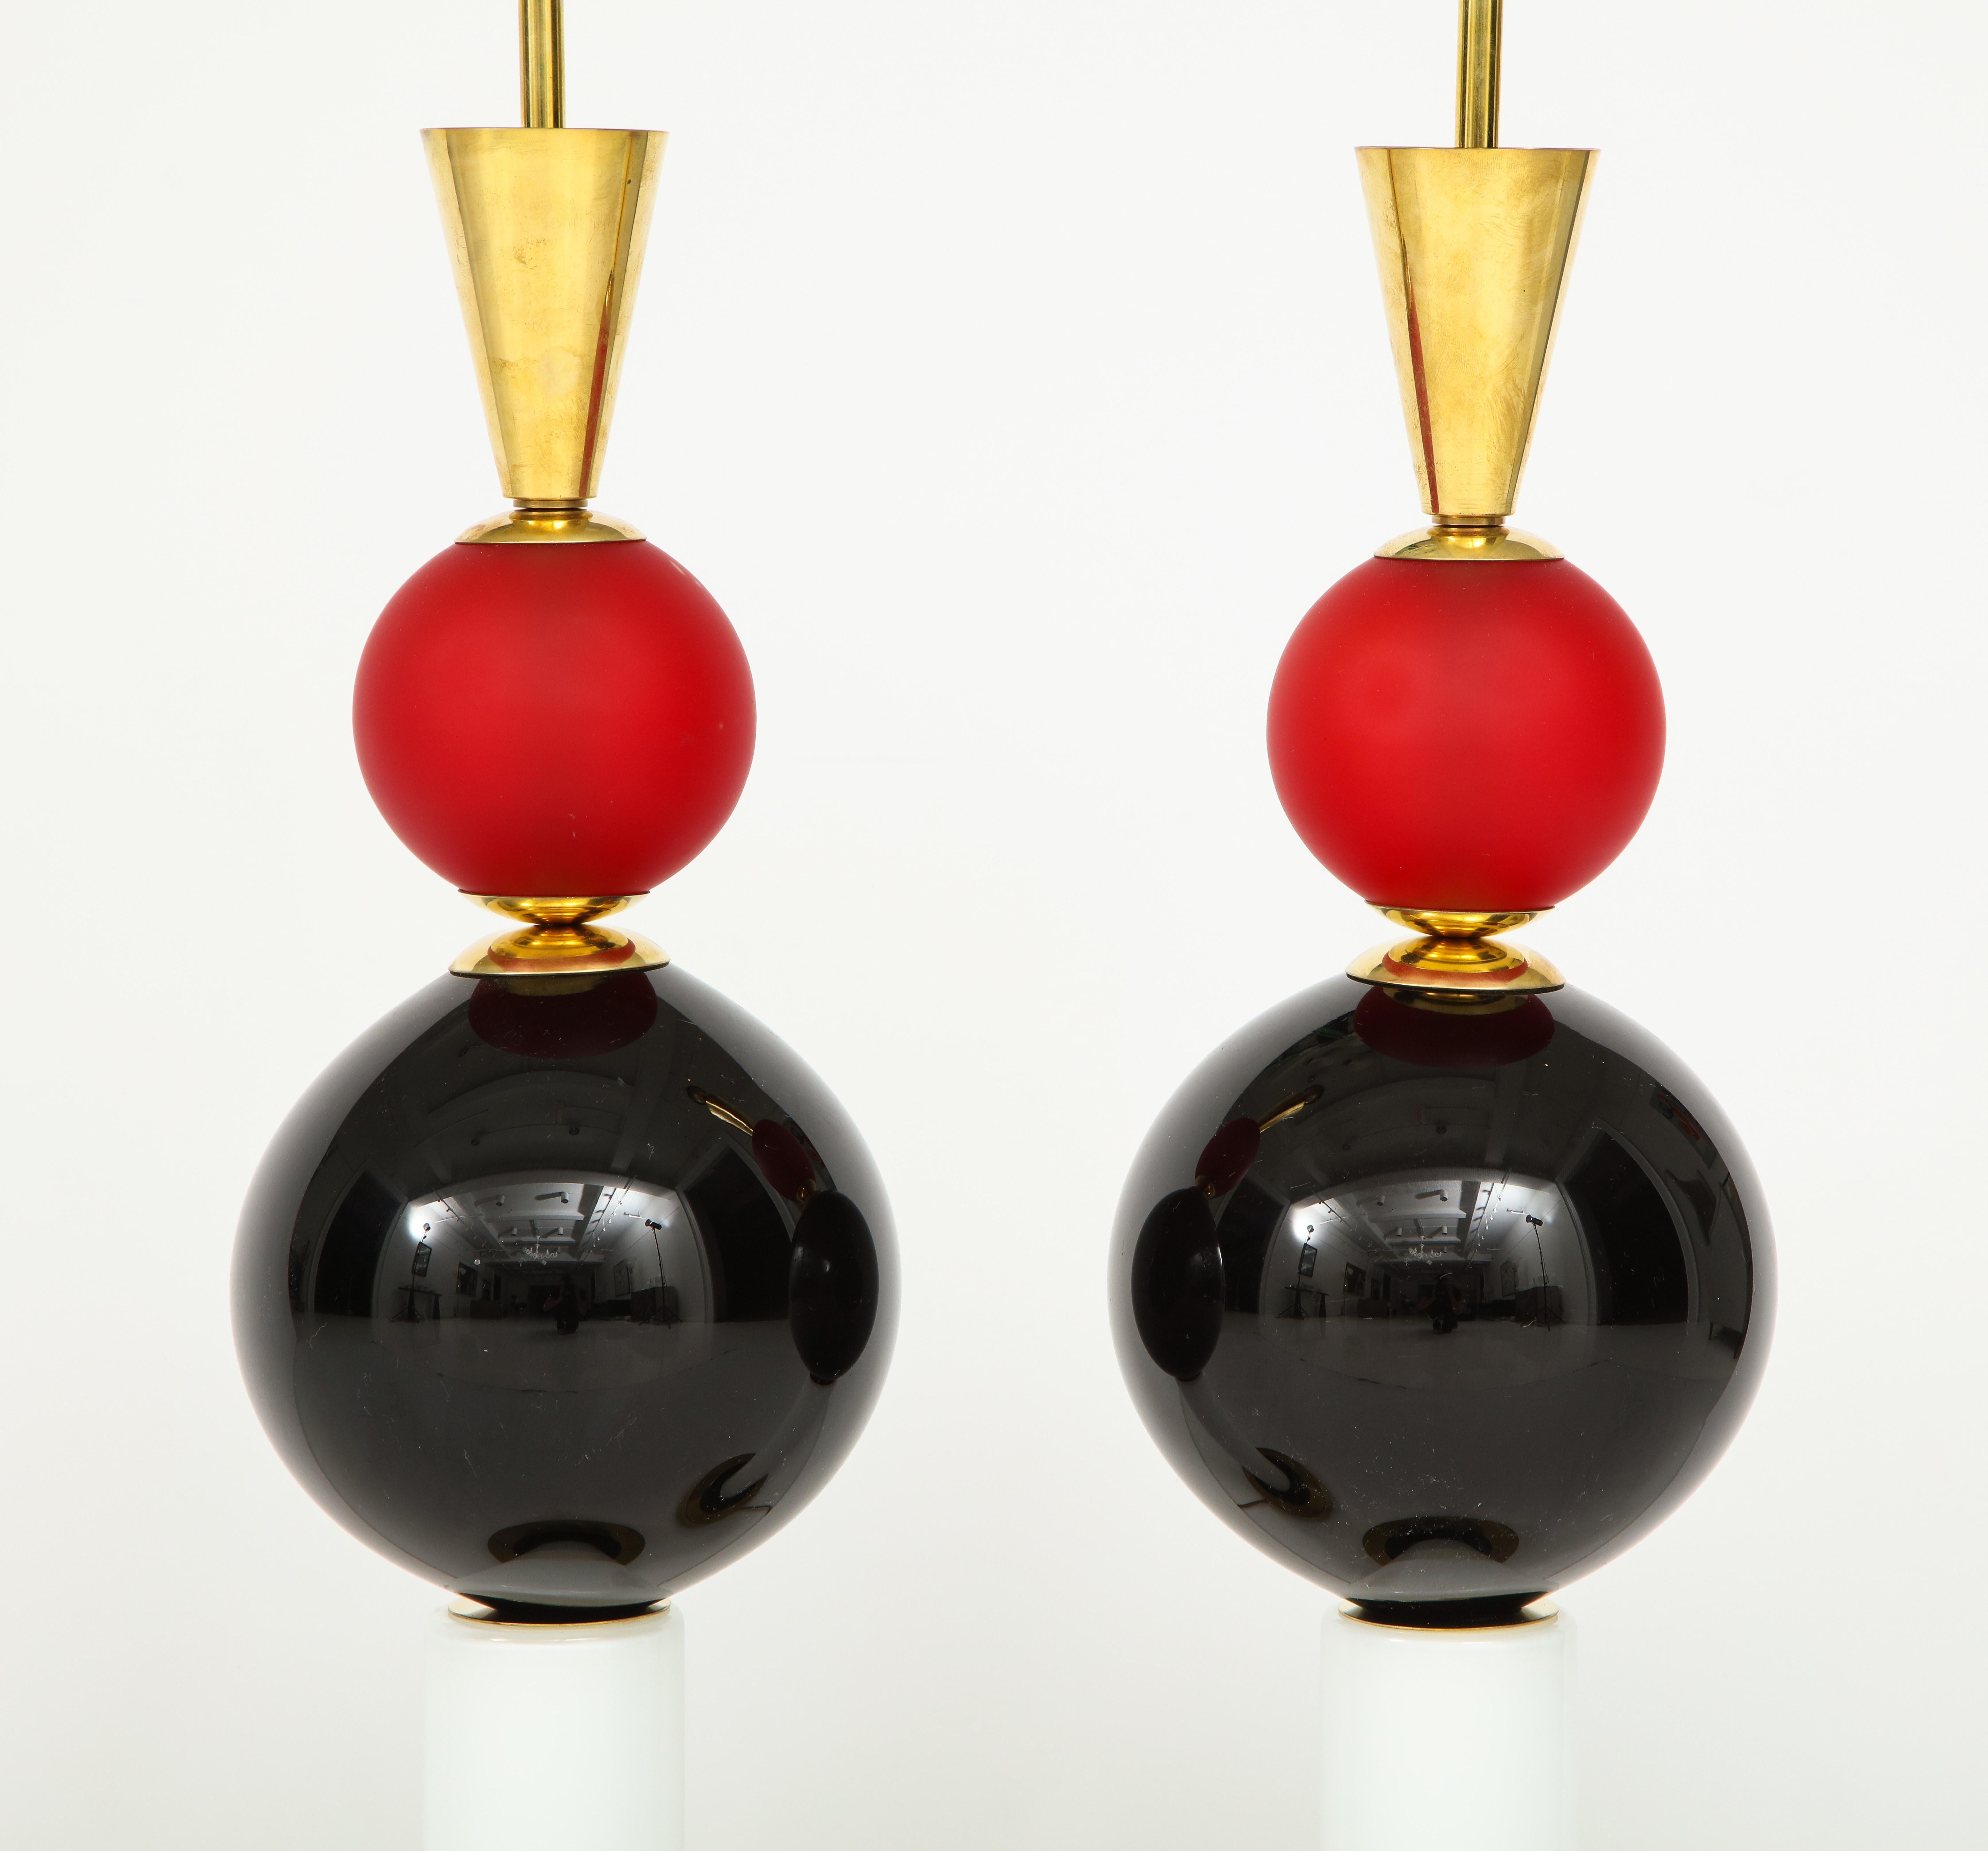 This bold pair of handblown Murano glass lamps consists of frosted red, glossy black and frosted white glass elements with natural brass frame. These one-of-a-kind lamps have been newly wired to fit US standards. Height measurement below includes